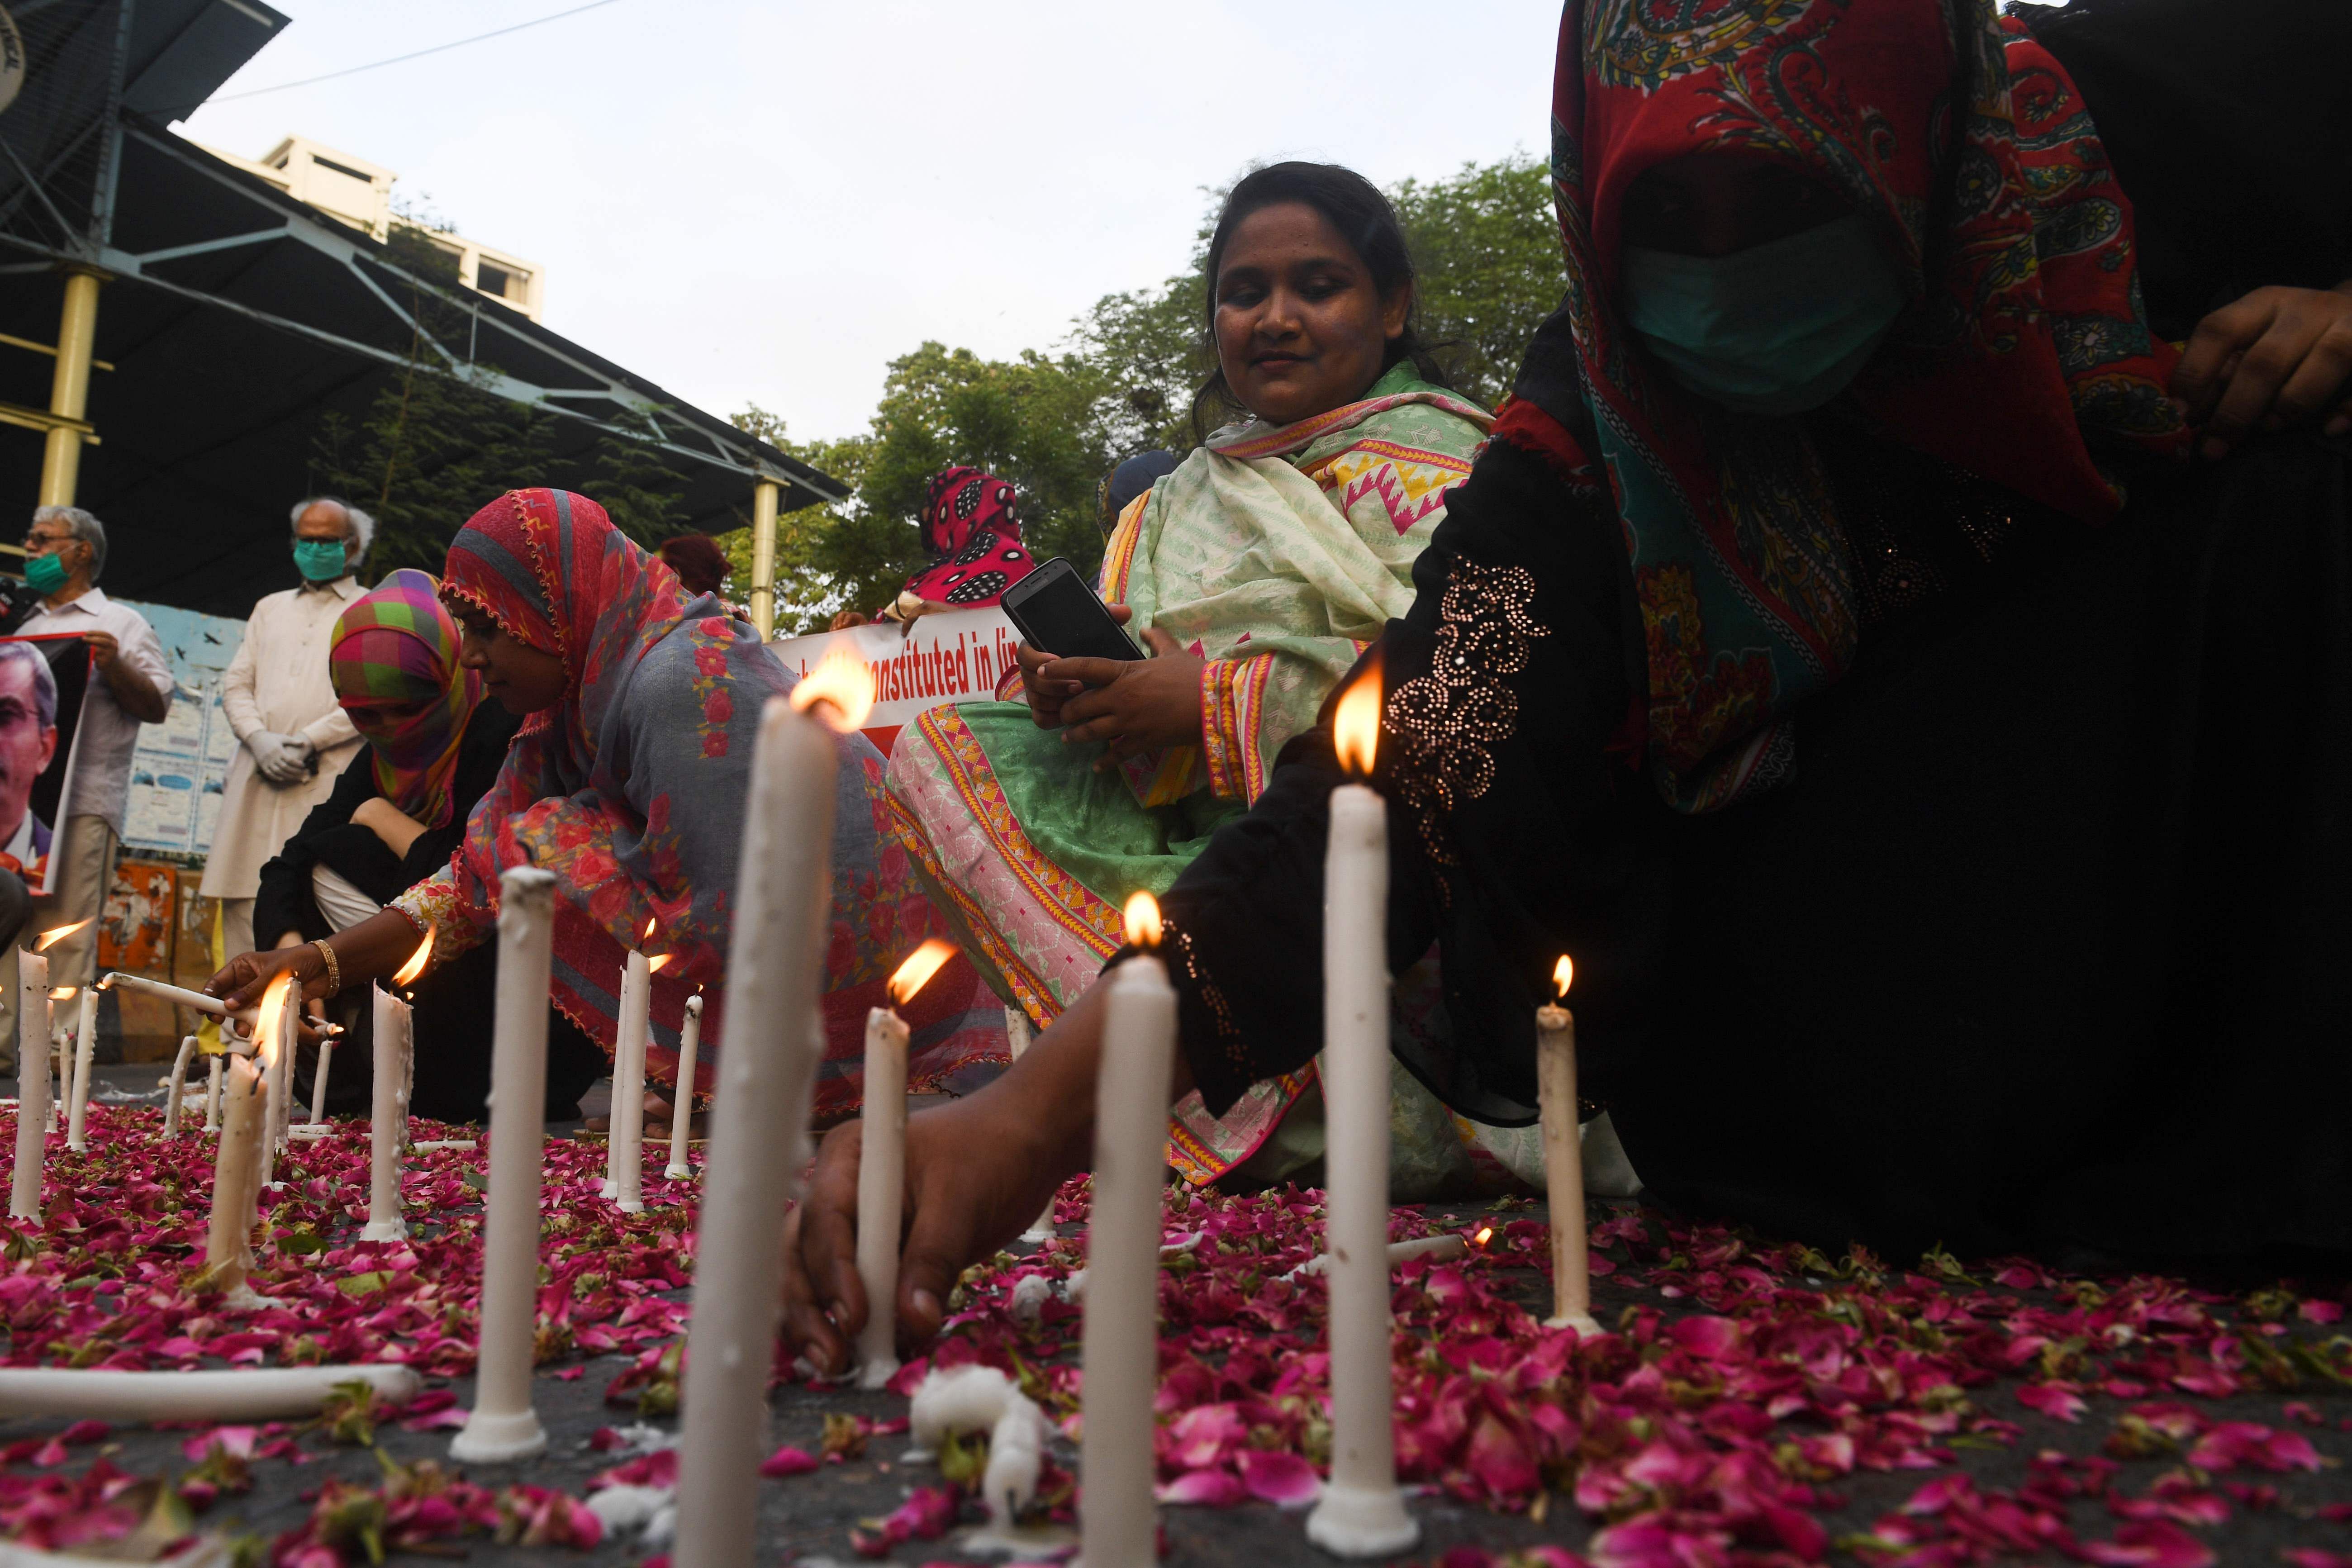 Trade union and civil society activists light candles in Karachi on May 28, 2020, during a candlelight vigil for the victims of the Pakistan International Airlines (PIA) plane crash. Credits: PTI Photo